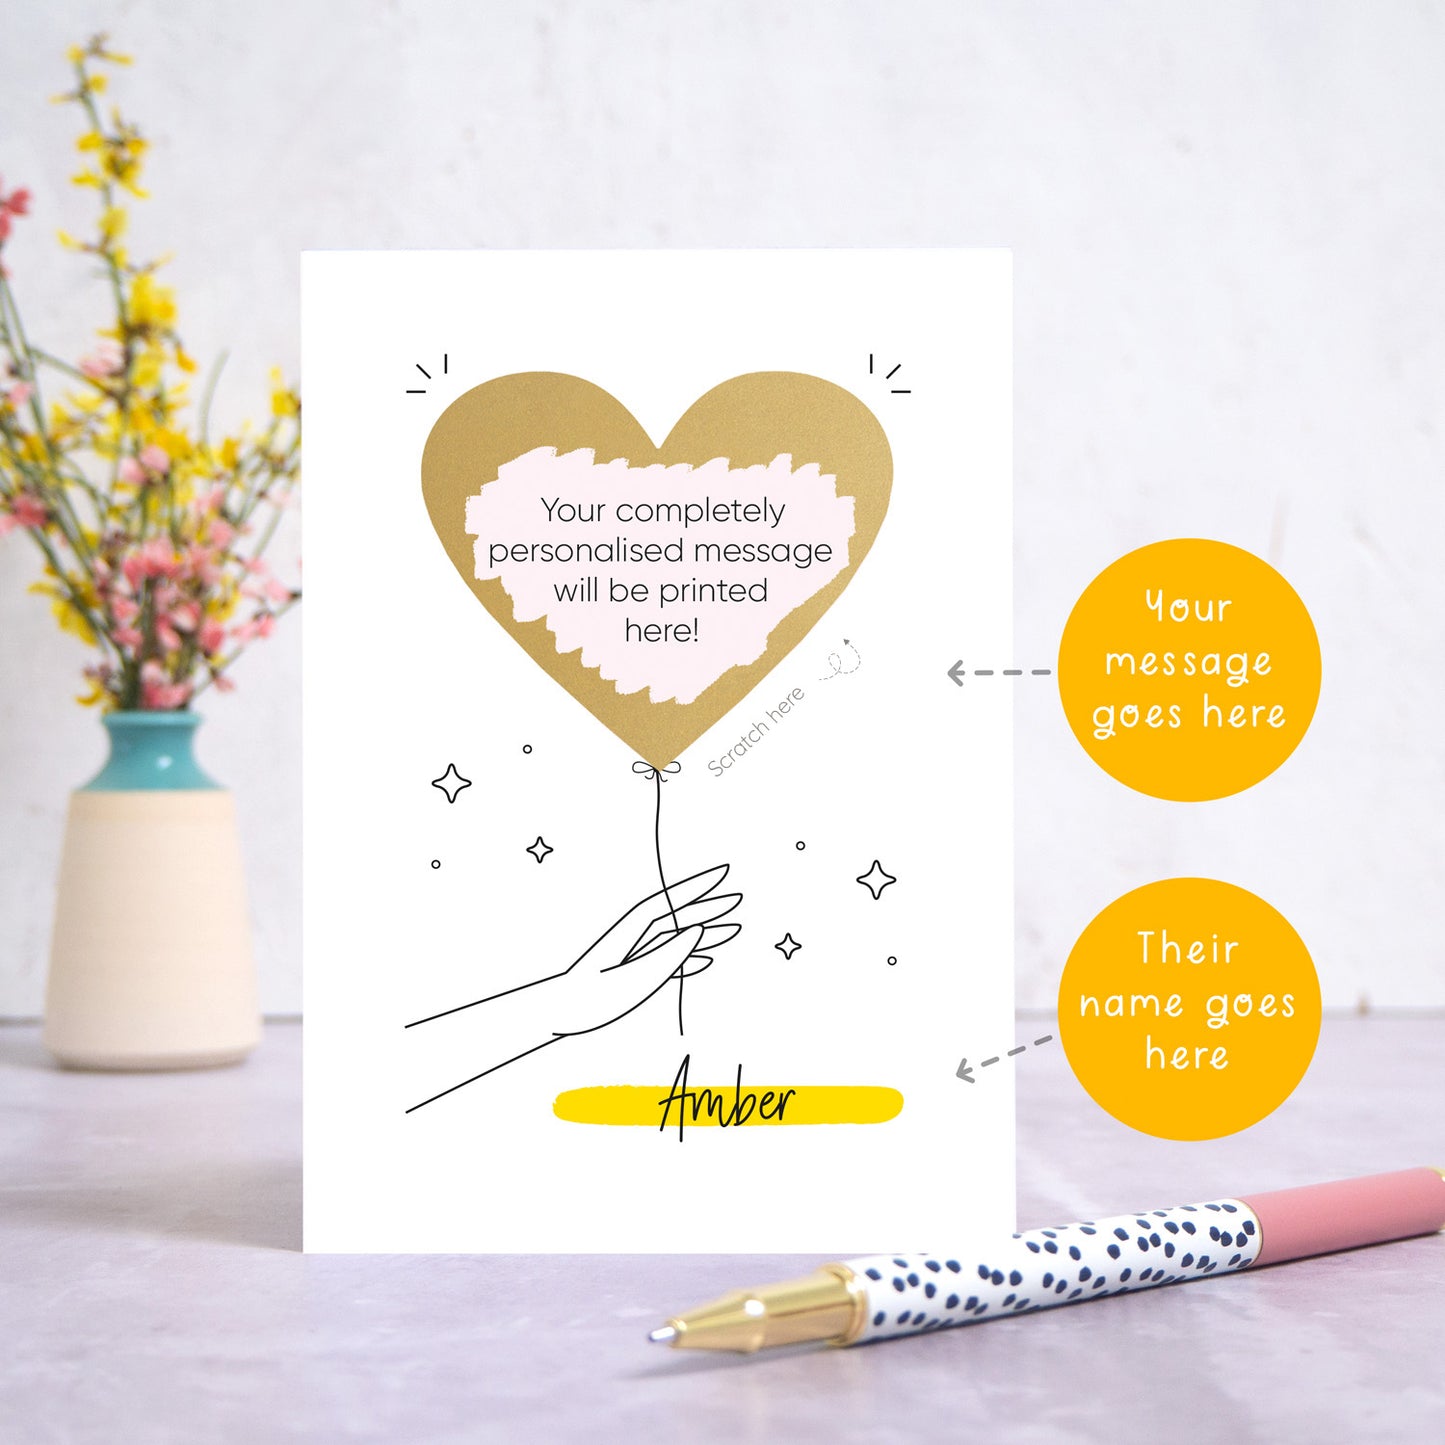 The scratch and reveal card has been photographed standing up on top of a grey surface. There is a small jar of flowers in the background and a pen in the foreground. To the right of the card are two circles which point to the areas that can be personalised. These are the name and the scratch off message. The gold heart has been scratched off to reveal the custom text.